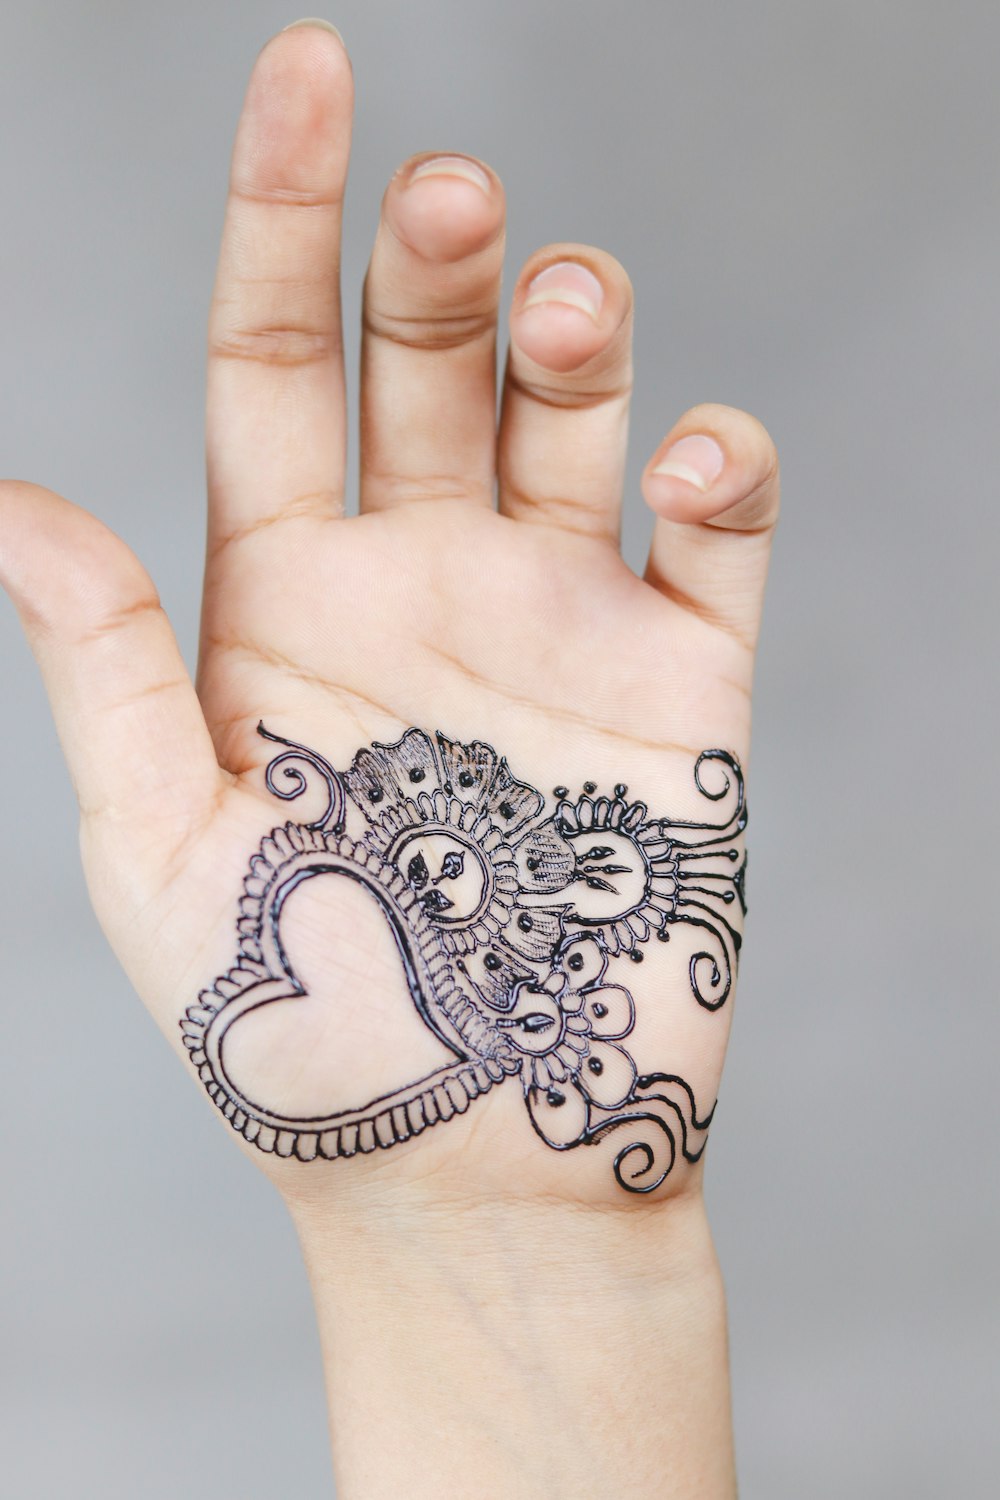 Left Person S Hand With Tattoo Photo Free Tattoo Image On Unsplash